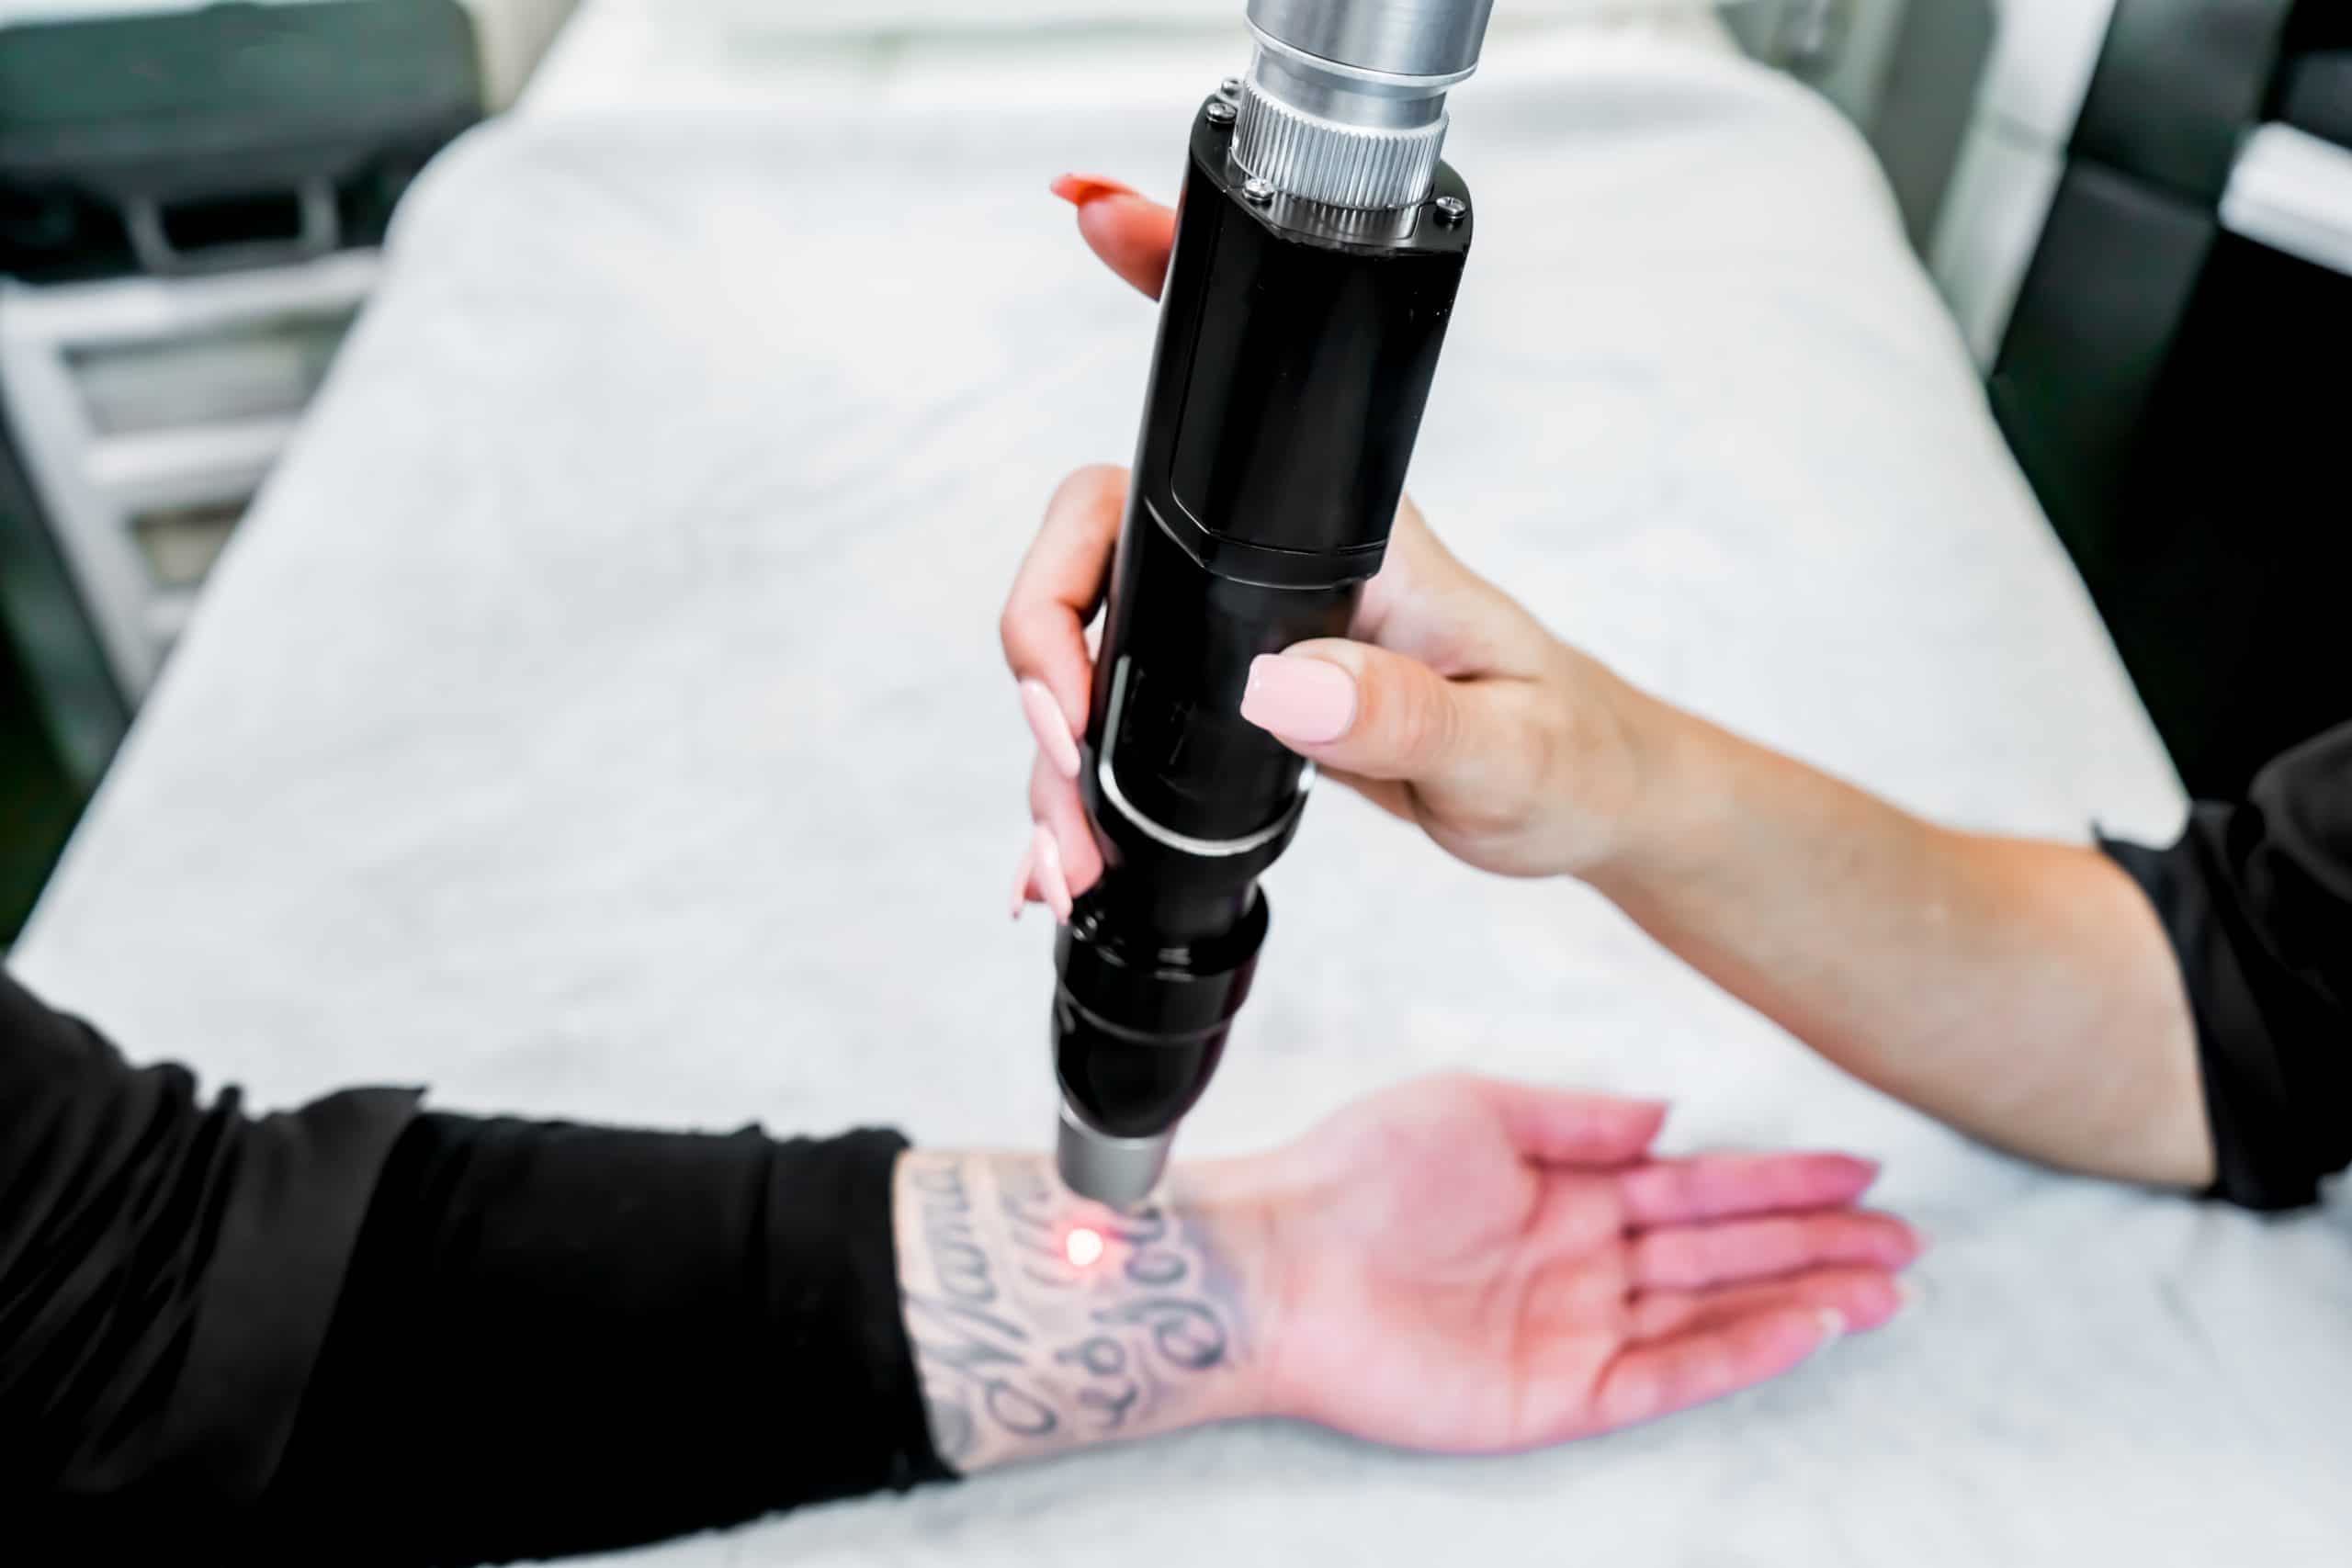 With The Pico Laser, Tattoo Removal Is Easier And More Comfortable